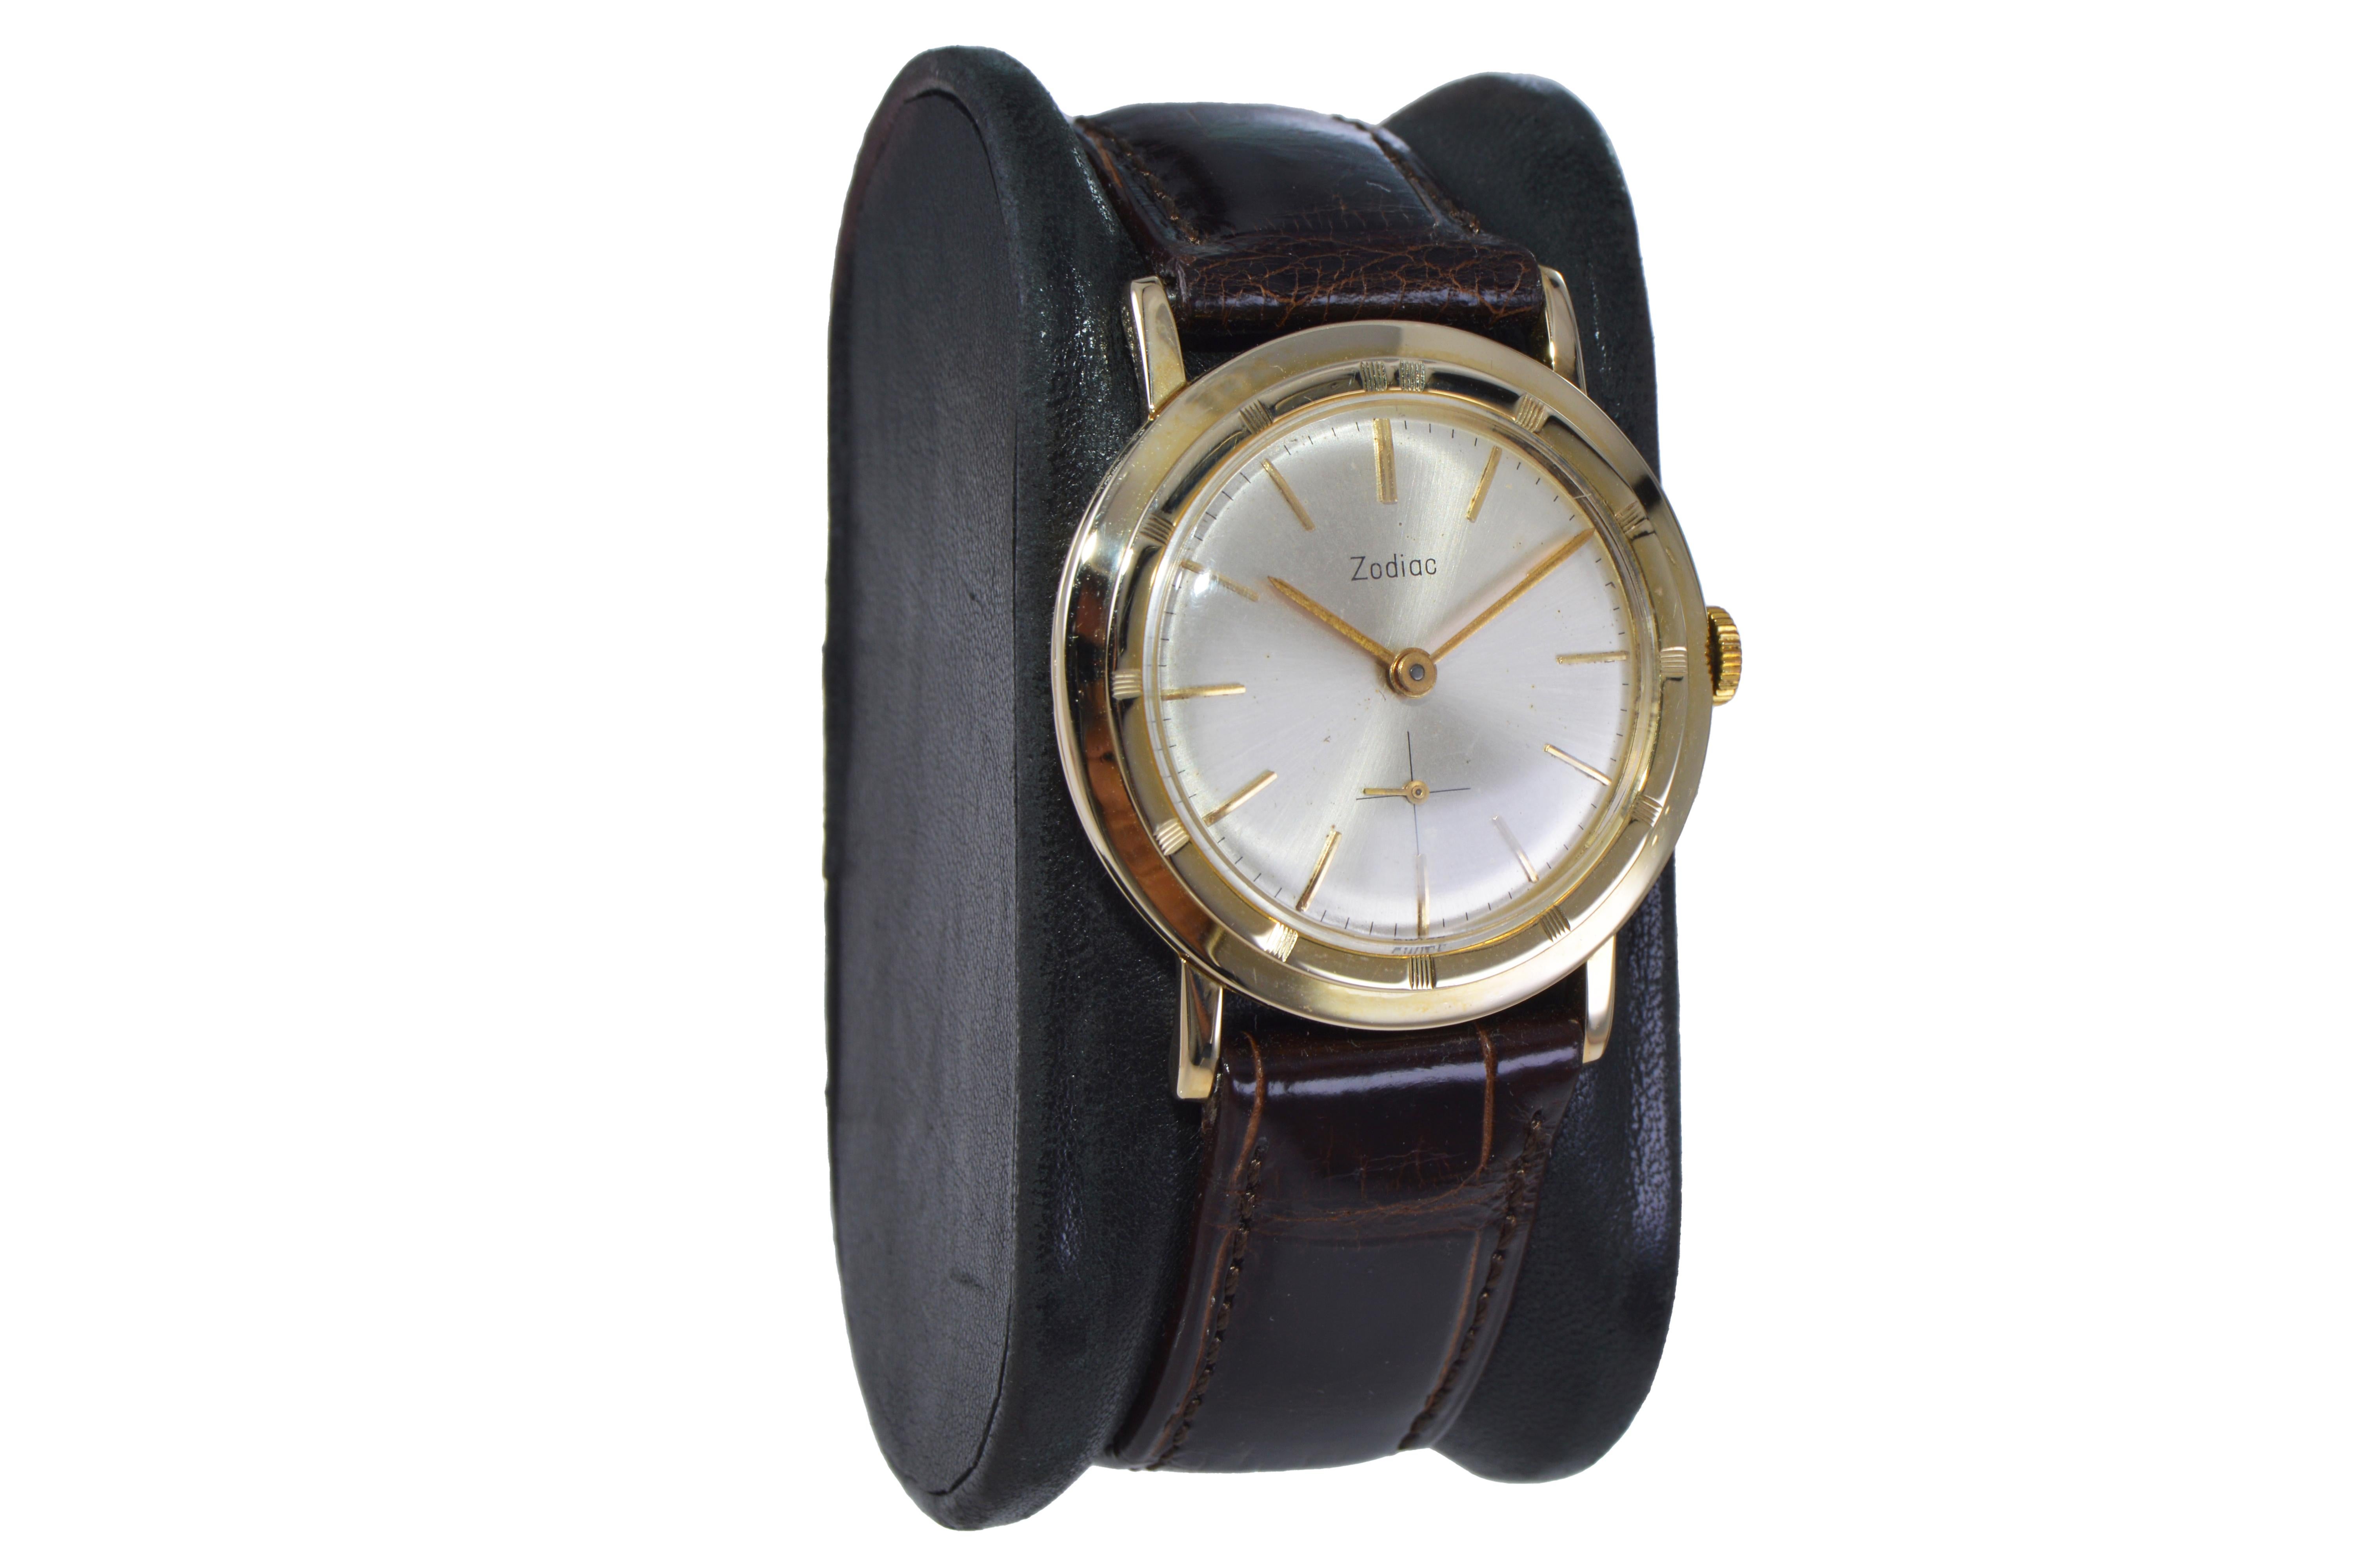 1950s style watches